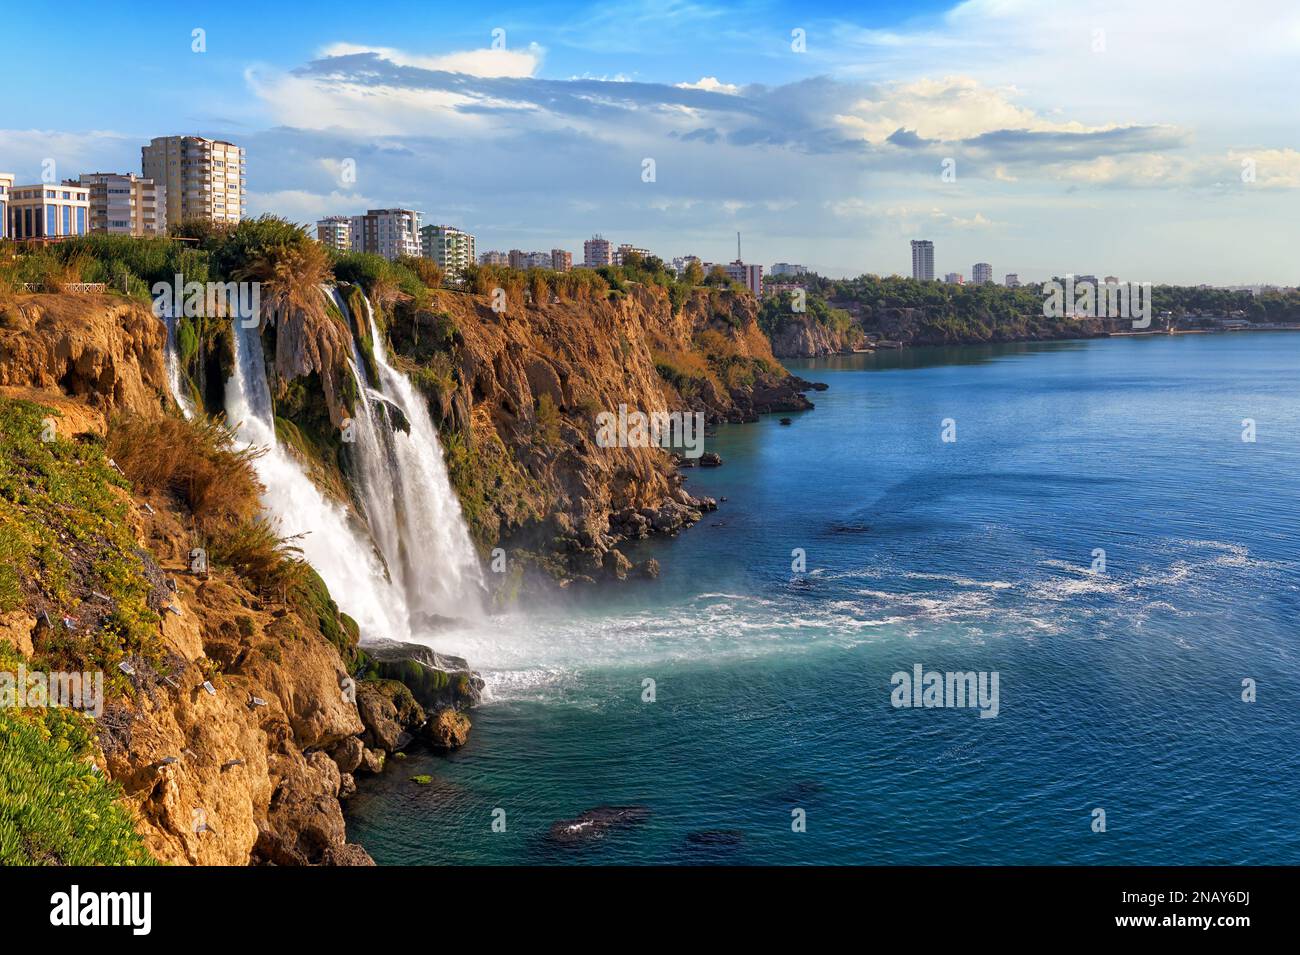 Picturesque landscape of the Lower Duden waterfall against the backdrop of the steep shores of the Mediterranean Sea and urban development in the Anta Stock Photo